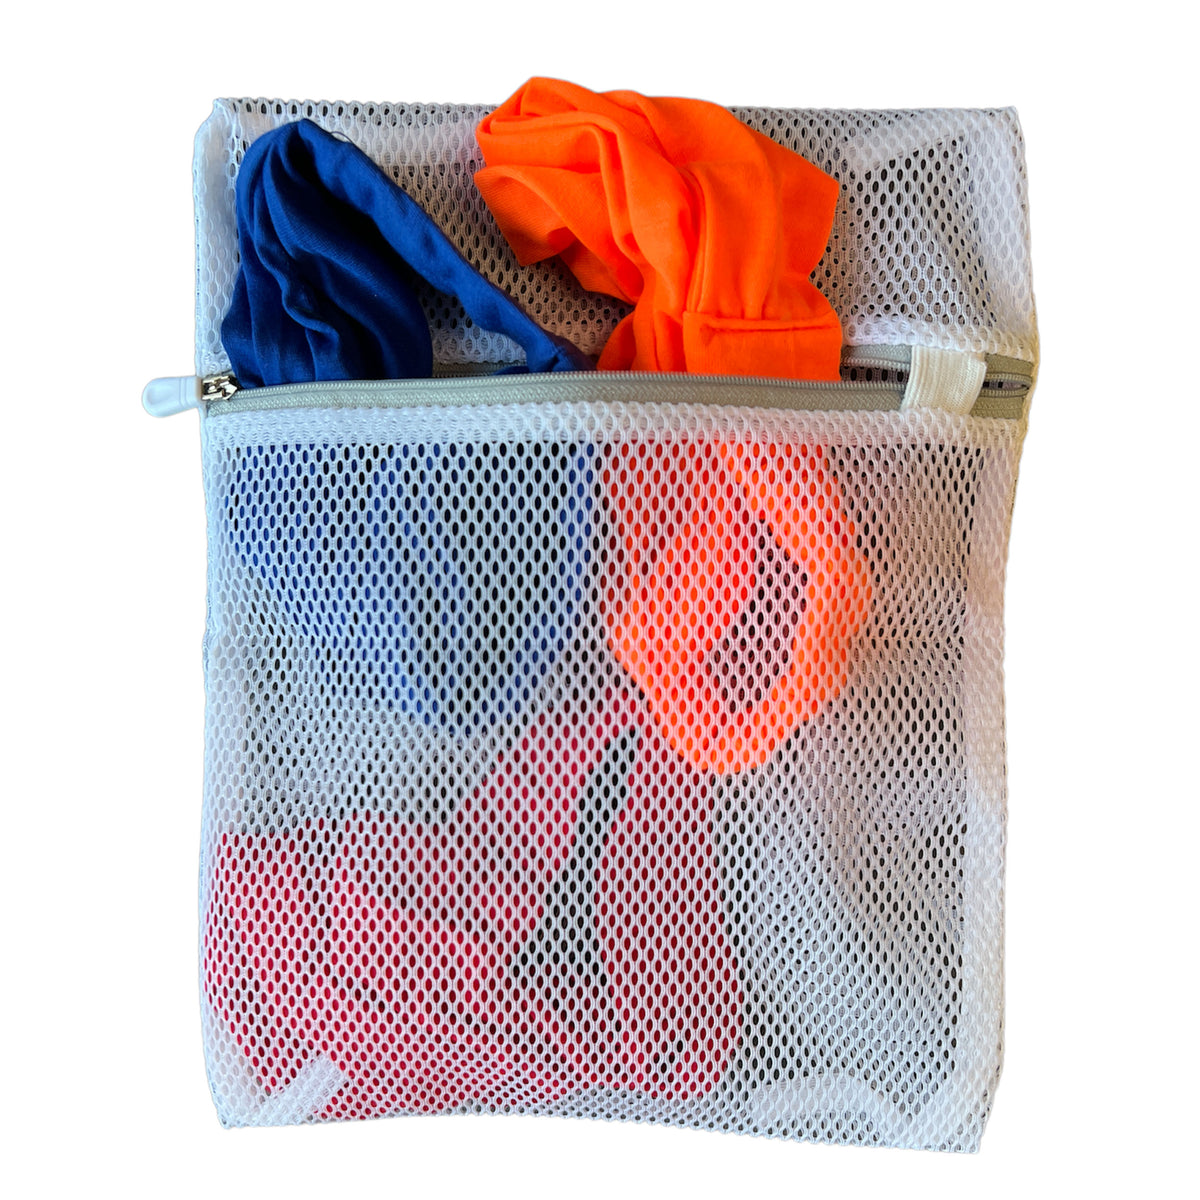 Laundry net / Laundry bag white with zipper (protects satin in the washing  machine)